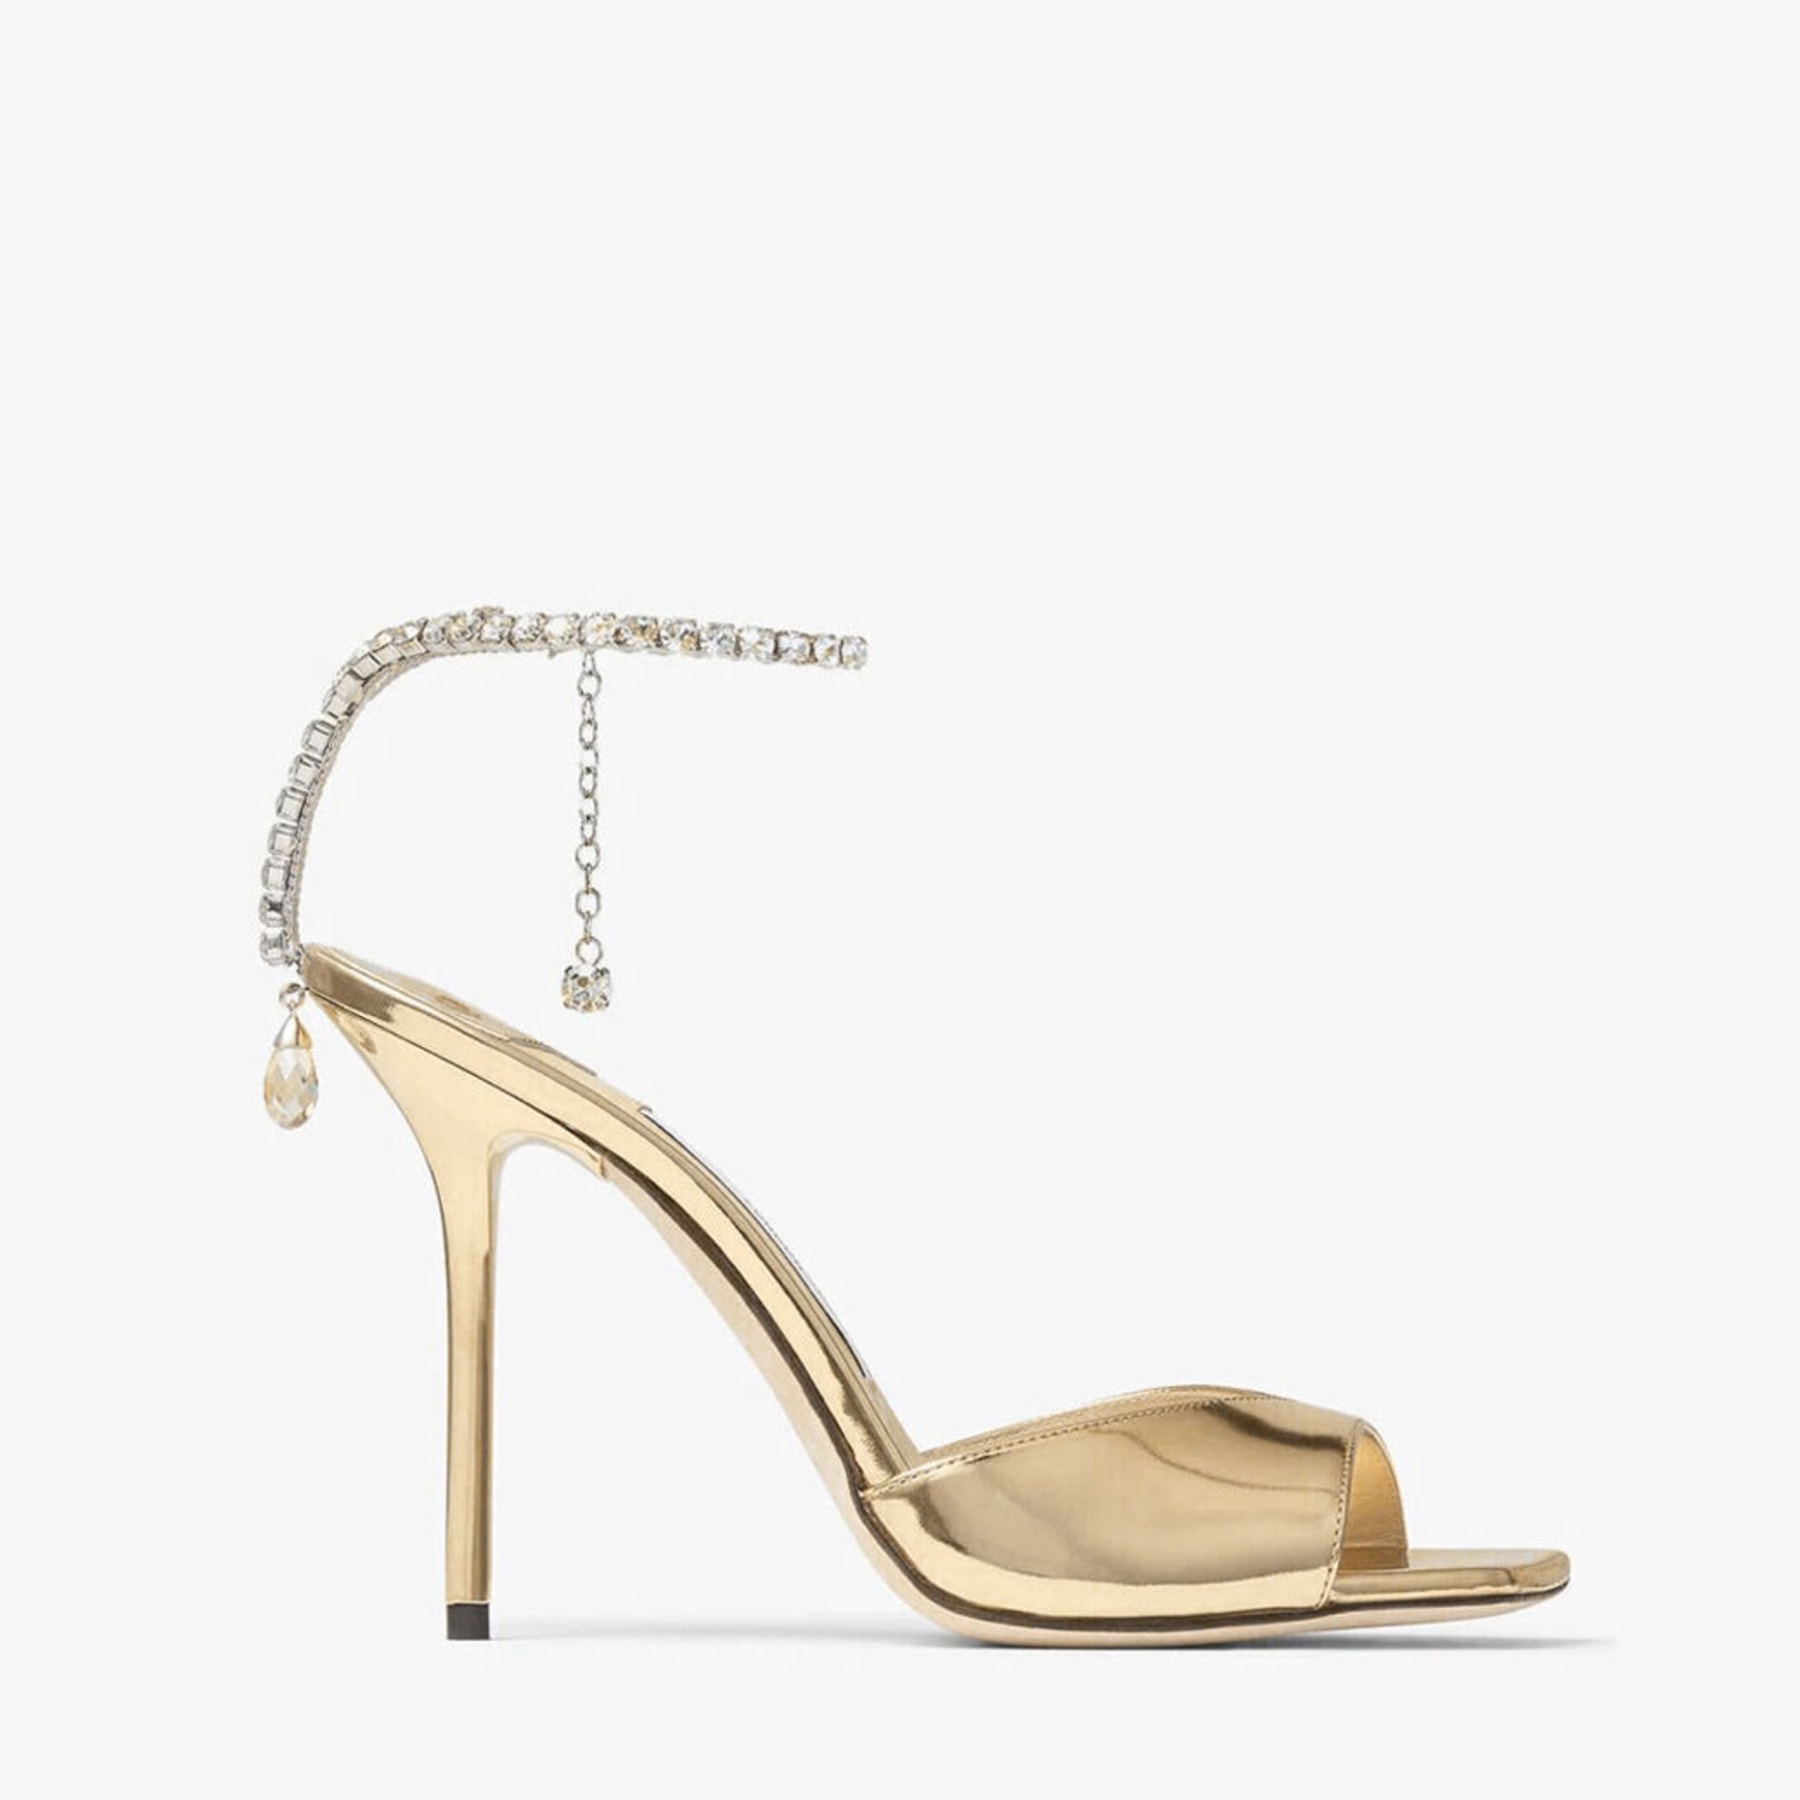 Jimmy Choo sandals sale up to 60% off